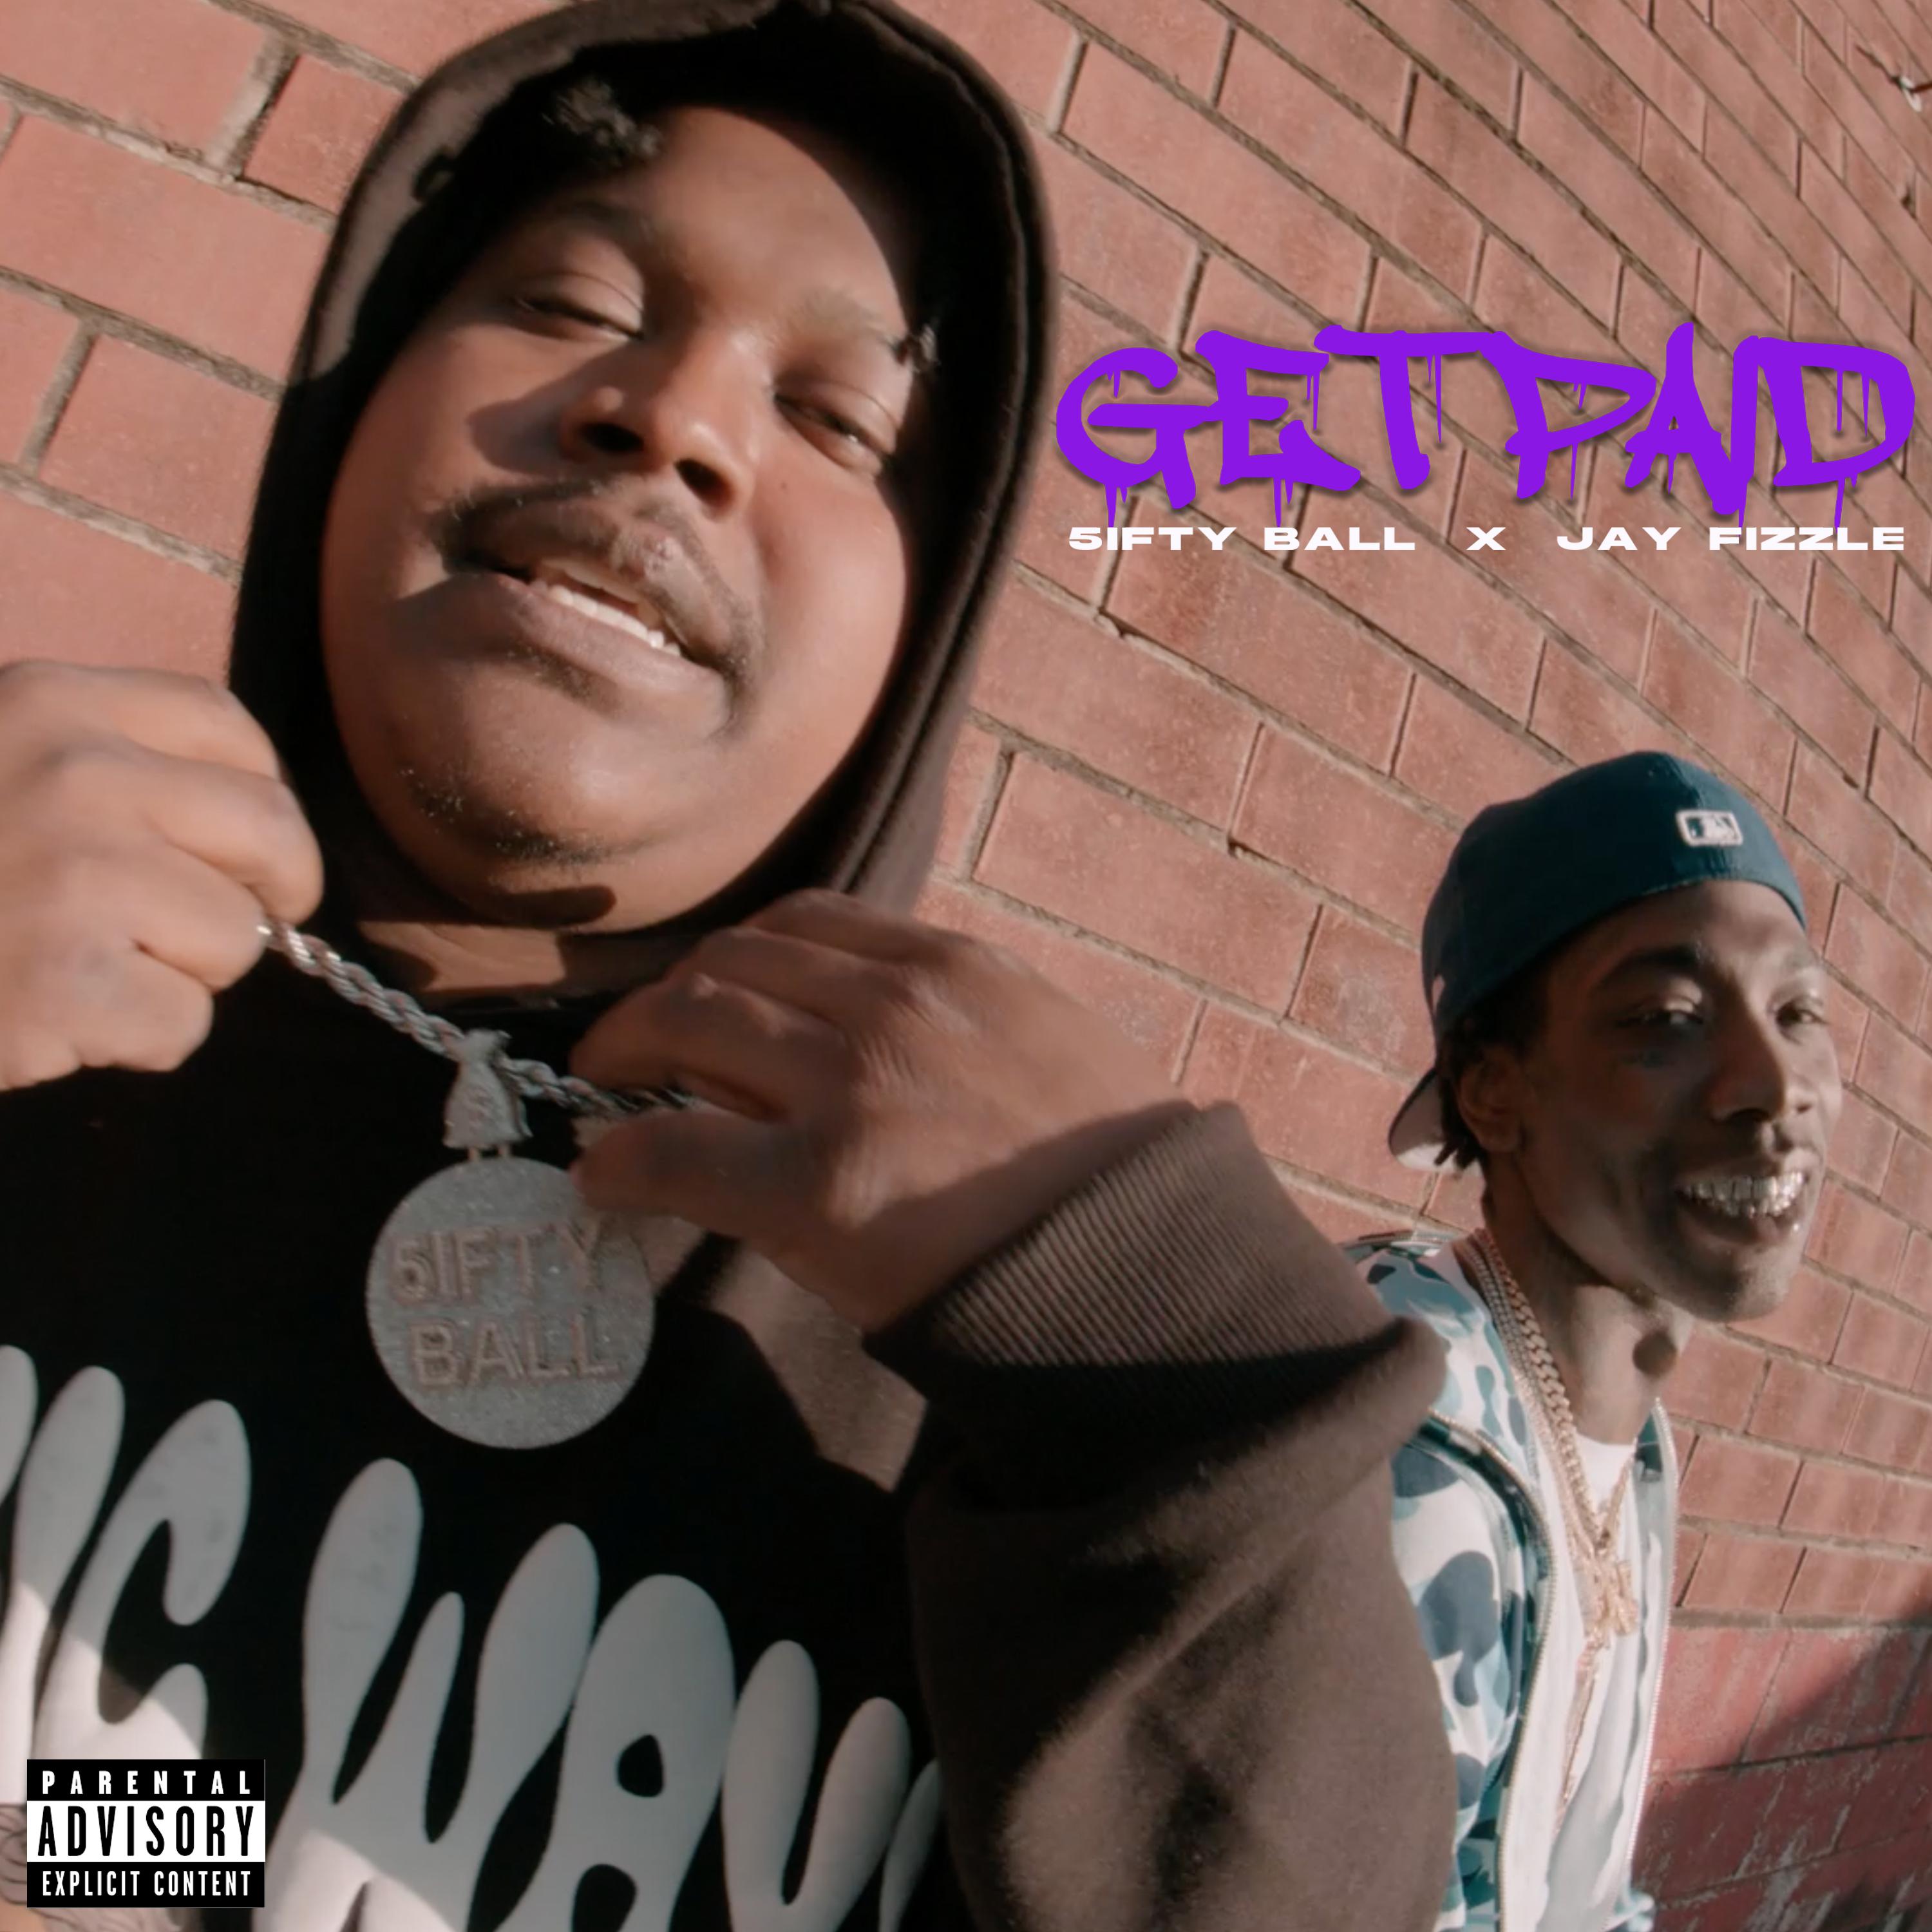 5ifty Ball - Get Paid